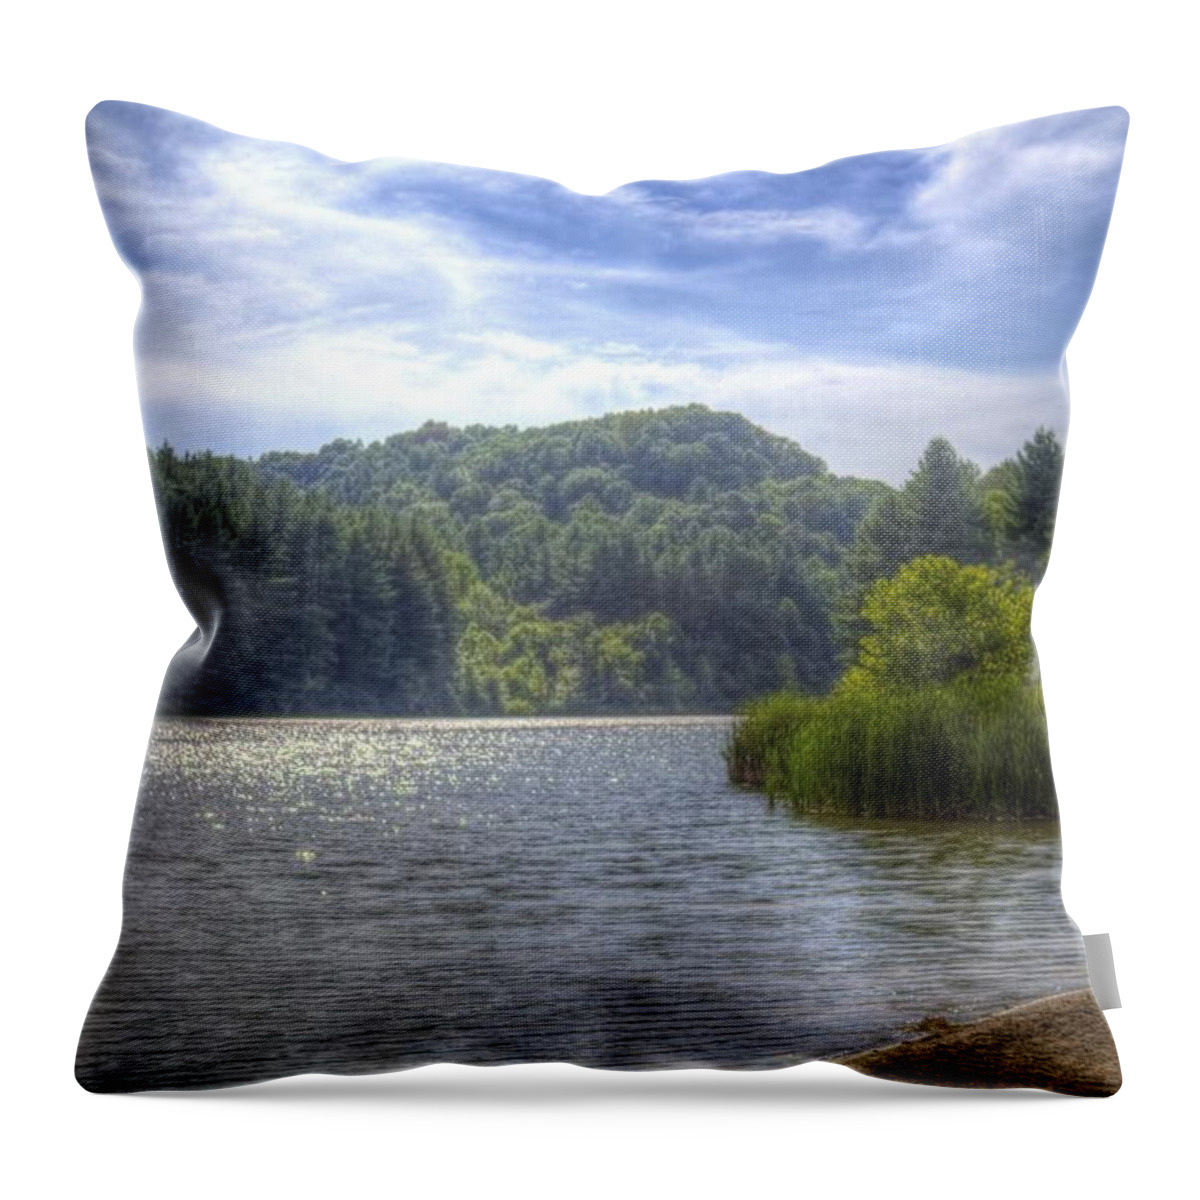 Strouds Throw Pillow featuring the photograph Strouds Lake by Jonny D